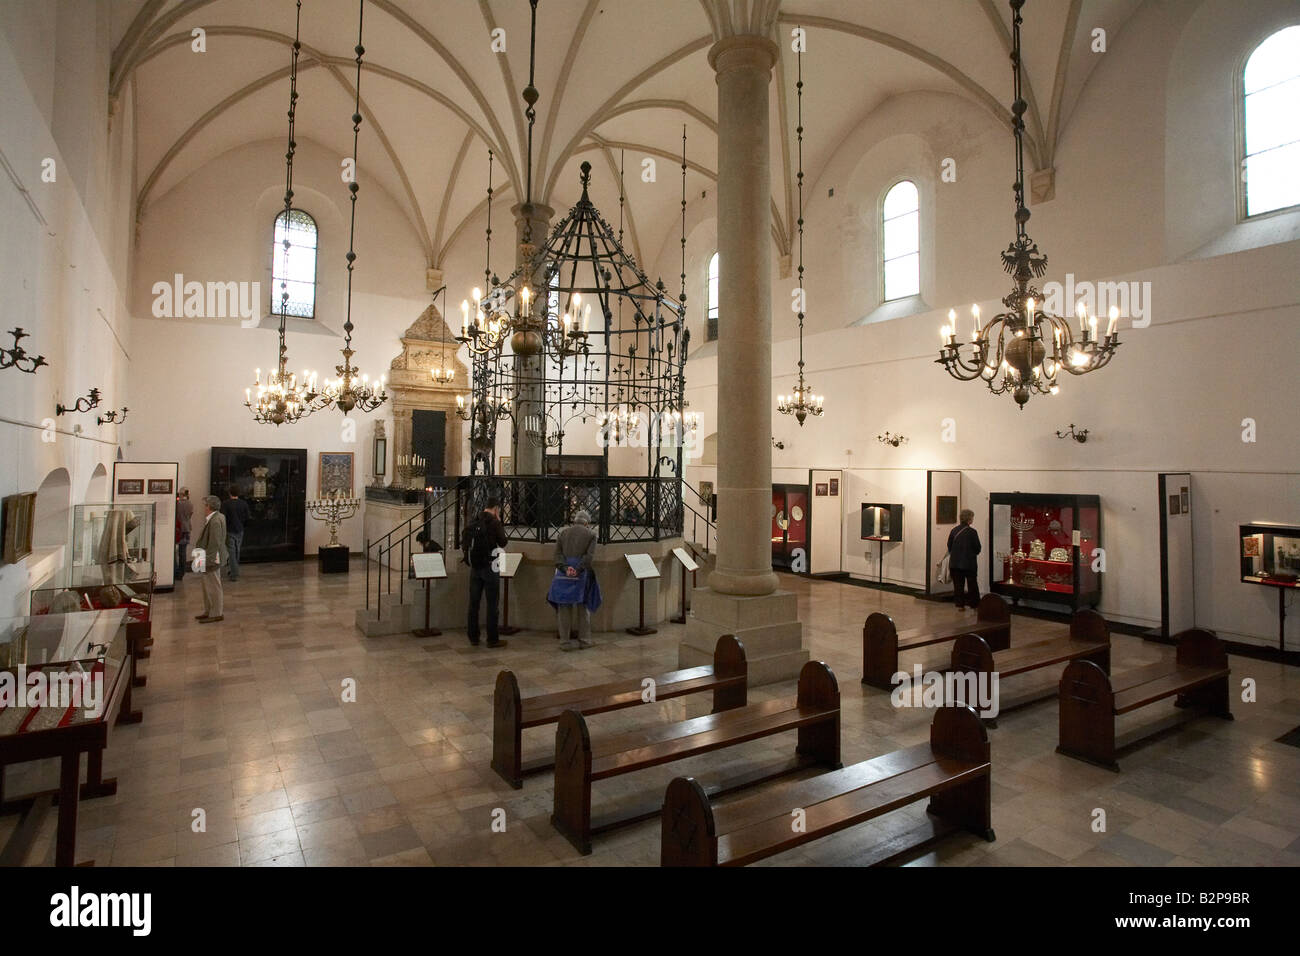 Poland Malopolska Krakow Museum Interior of Old Synagogue Museum of History and Culture of Krakow Jewry Kazimierz District Stock Photo